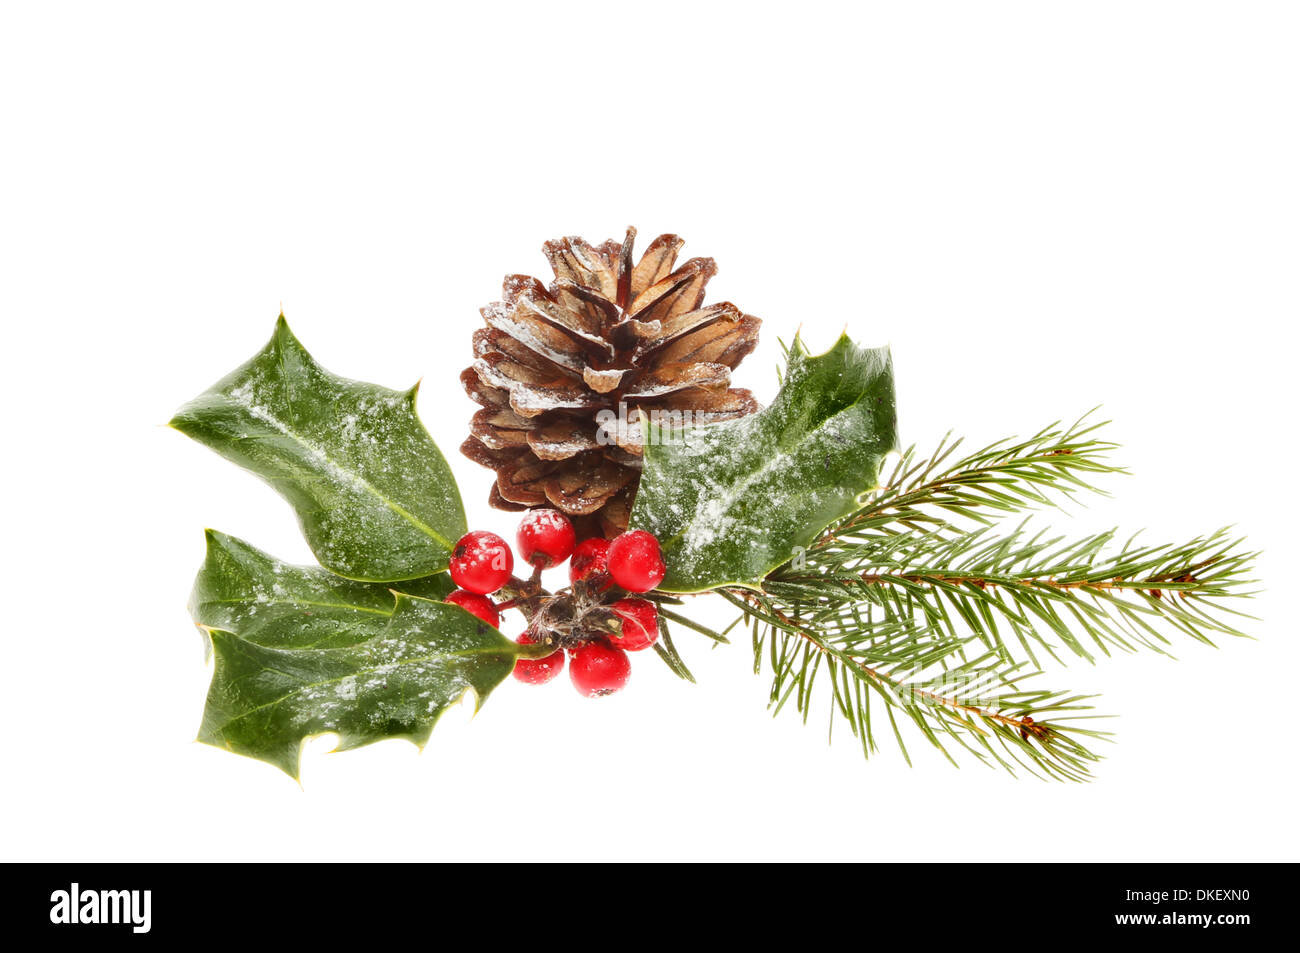 Christmas seasonal foliage a pine cone, pine needles and holly with berries isolated against white Stock Photo